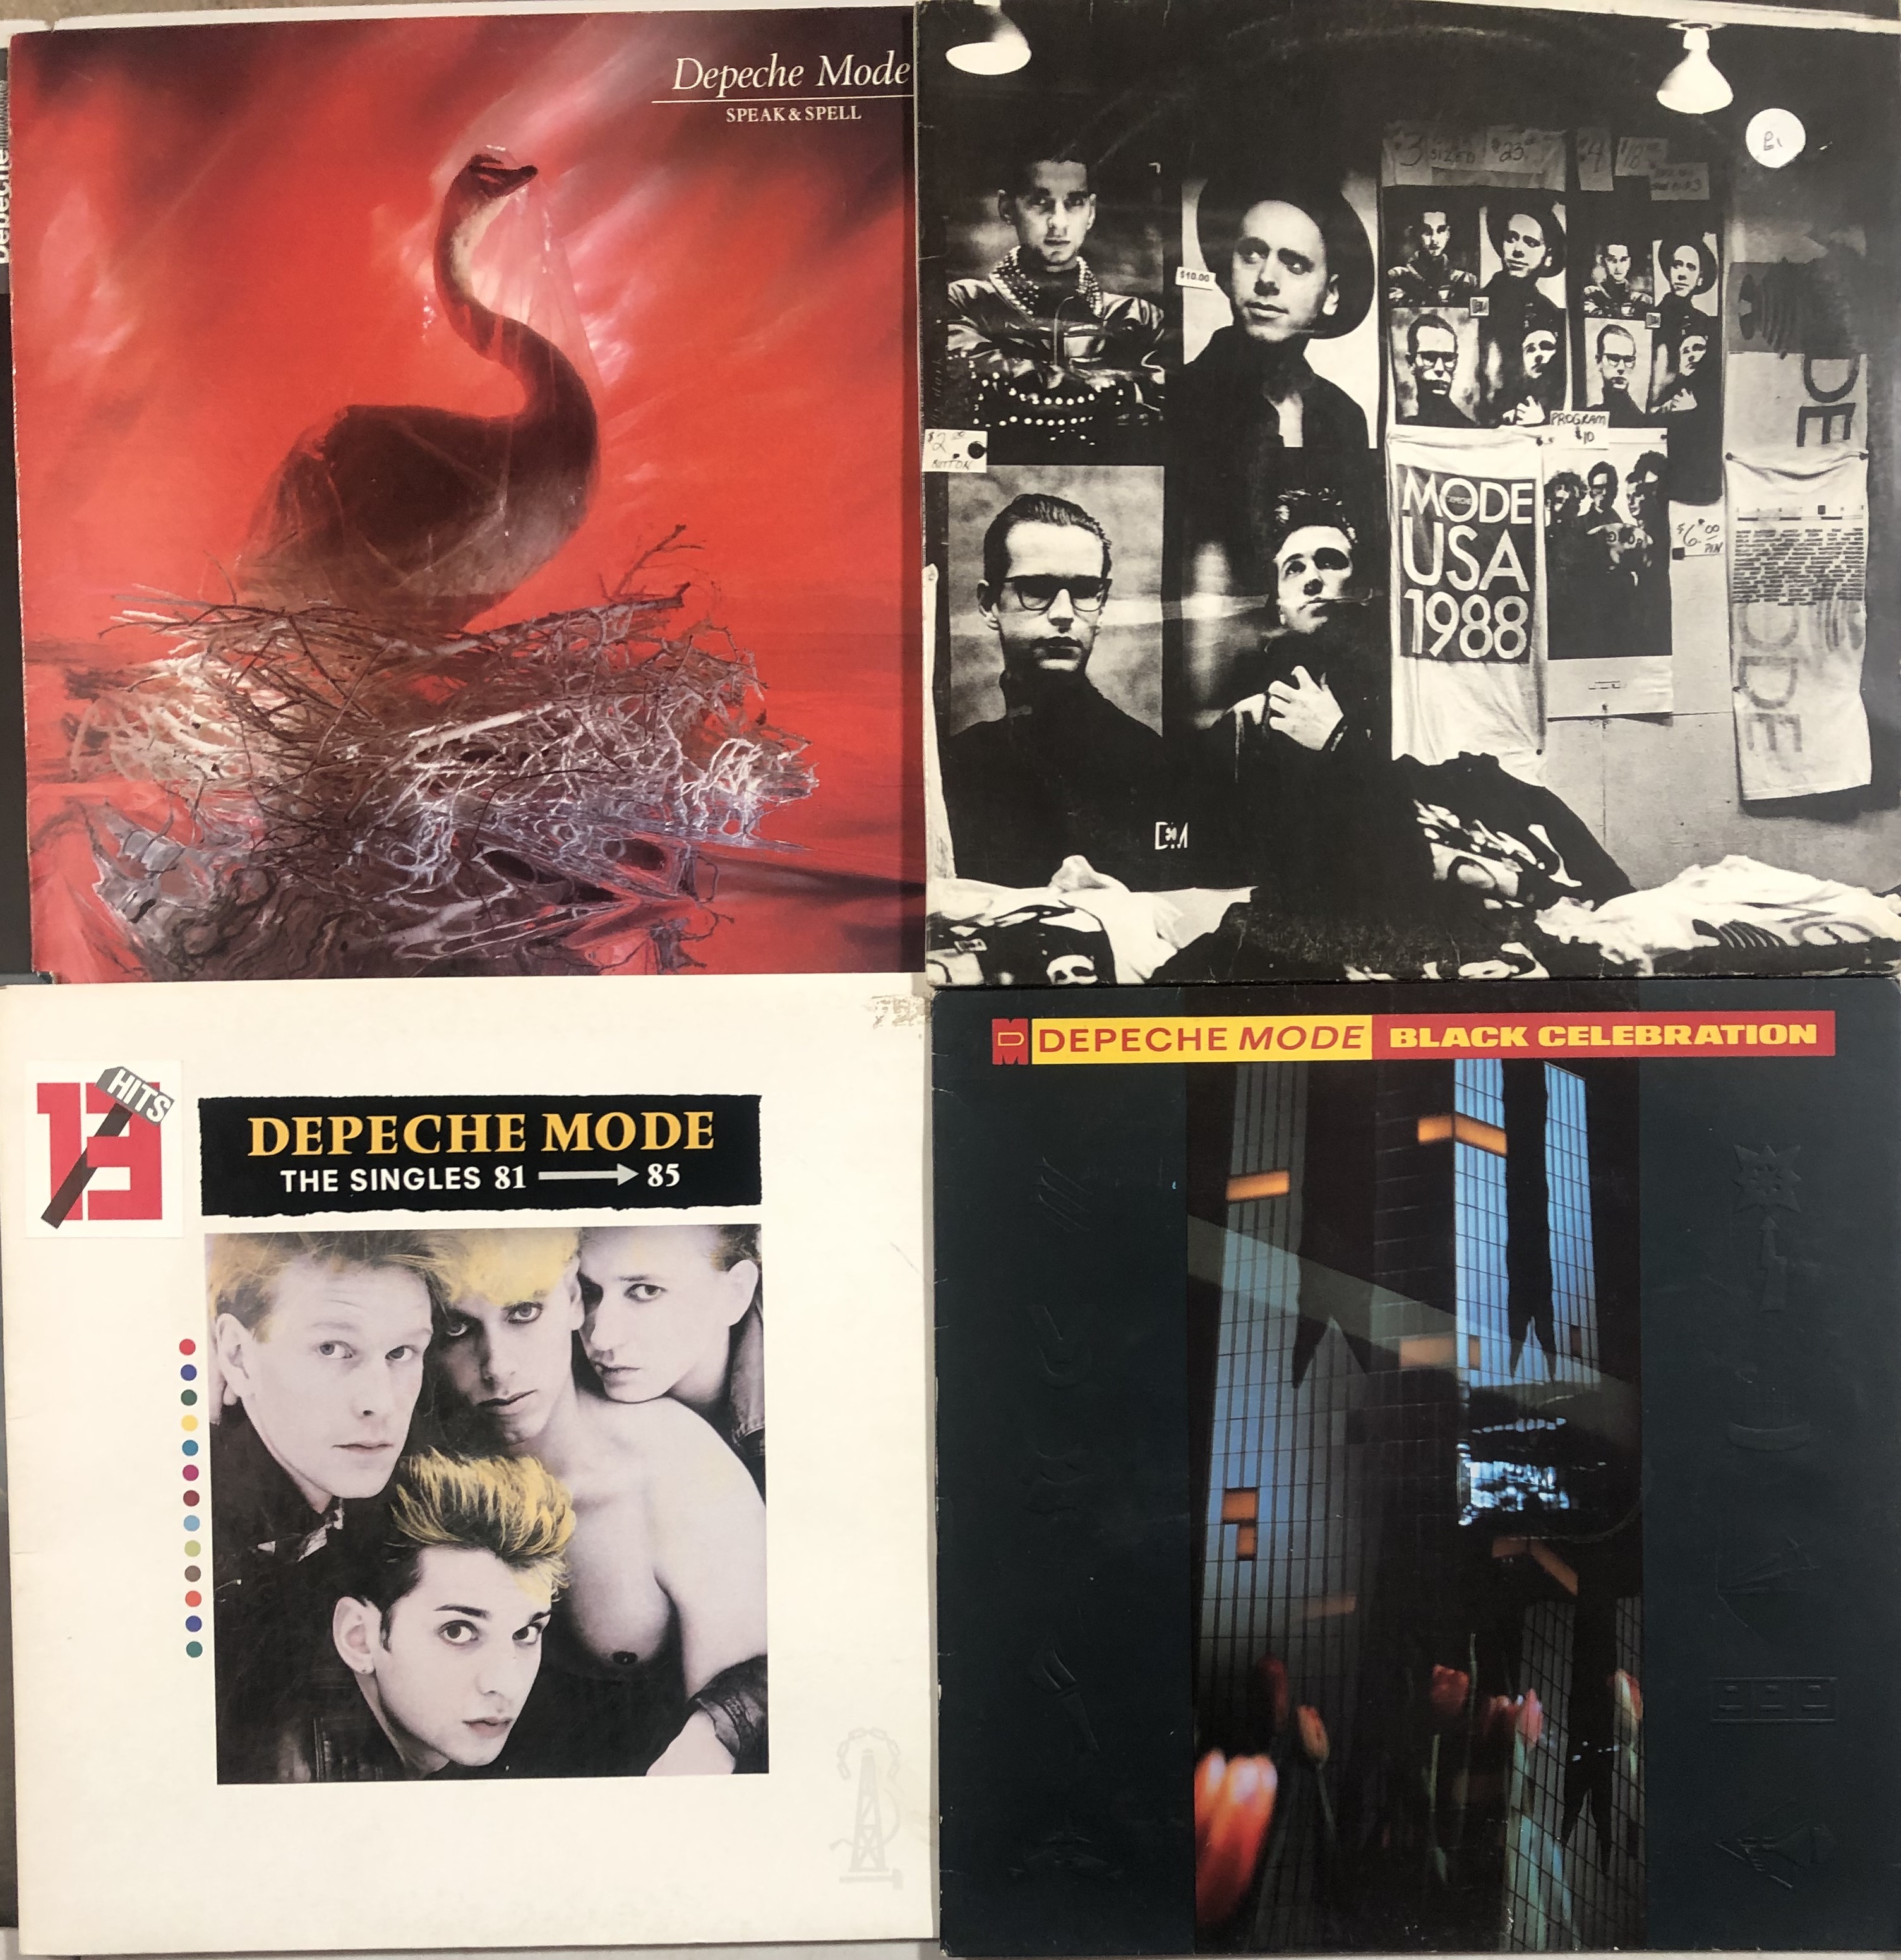 DEPECHE MODE - UK LPs. Brill collection of 10 x LPs including those hard to find 90s releases... - Image 3 of 3